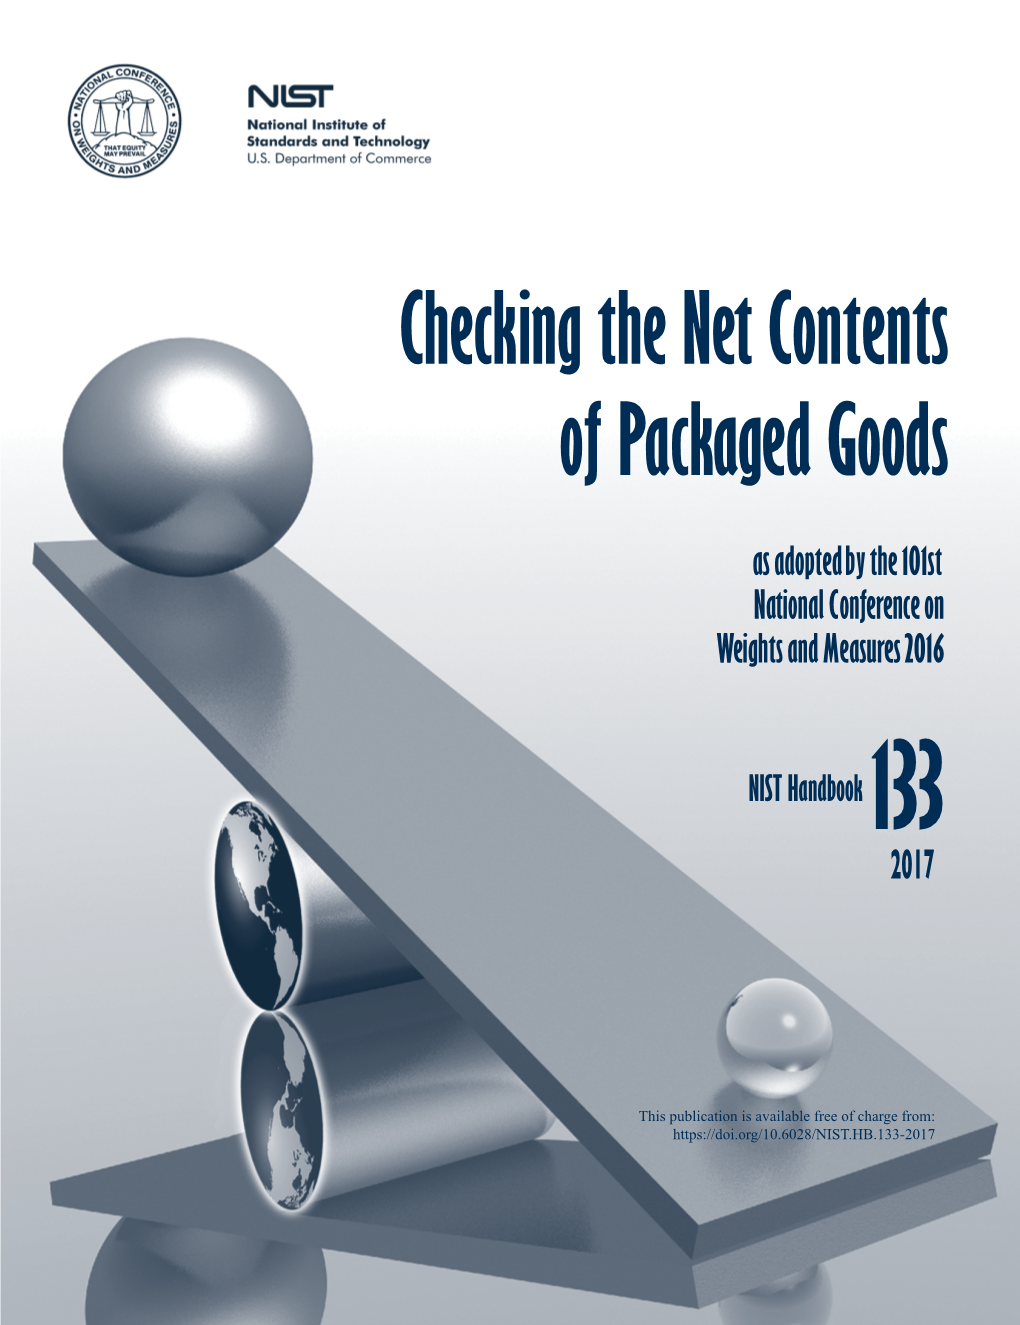 Checking the Net Contents of Packaged Goods (HB 133, 2017